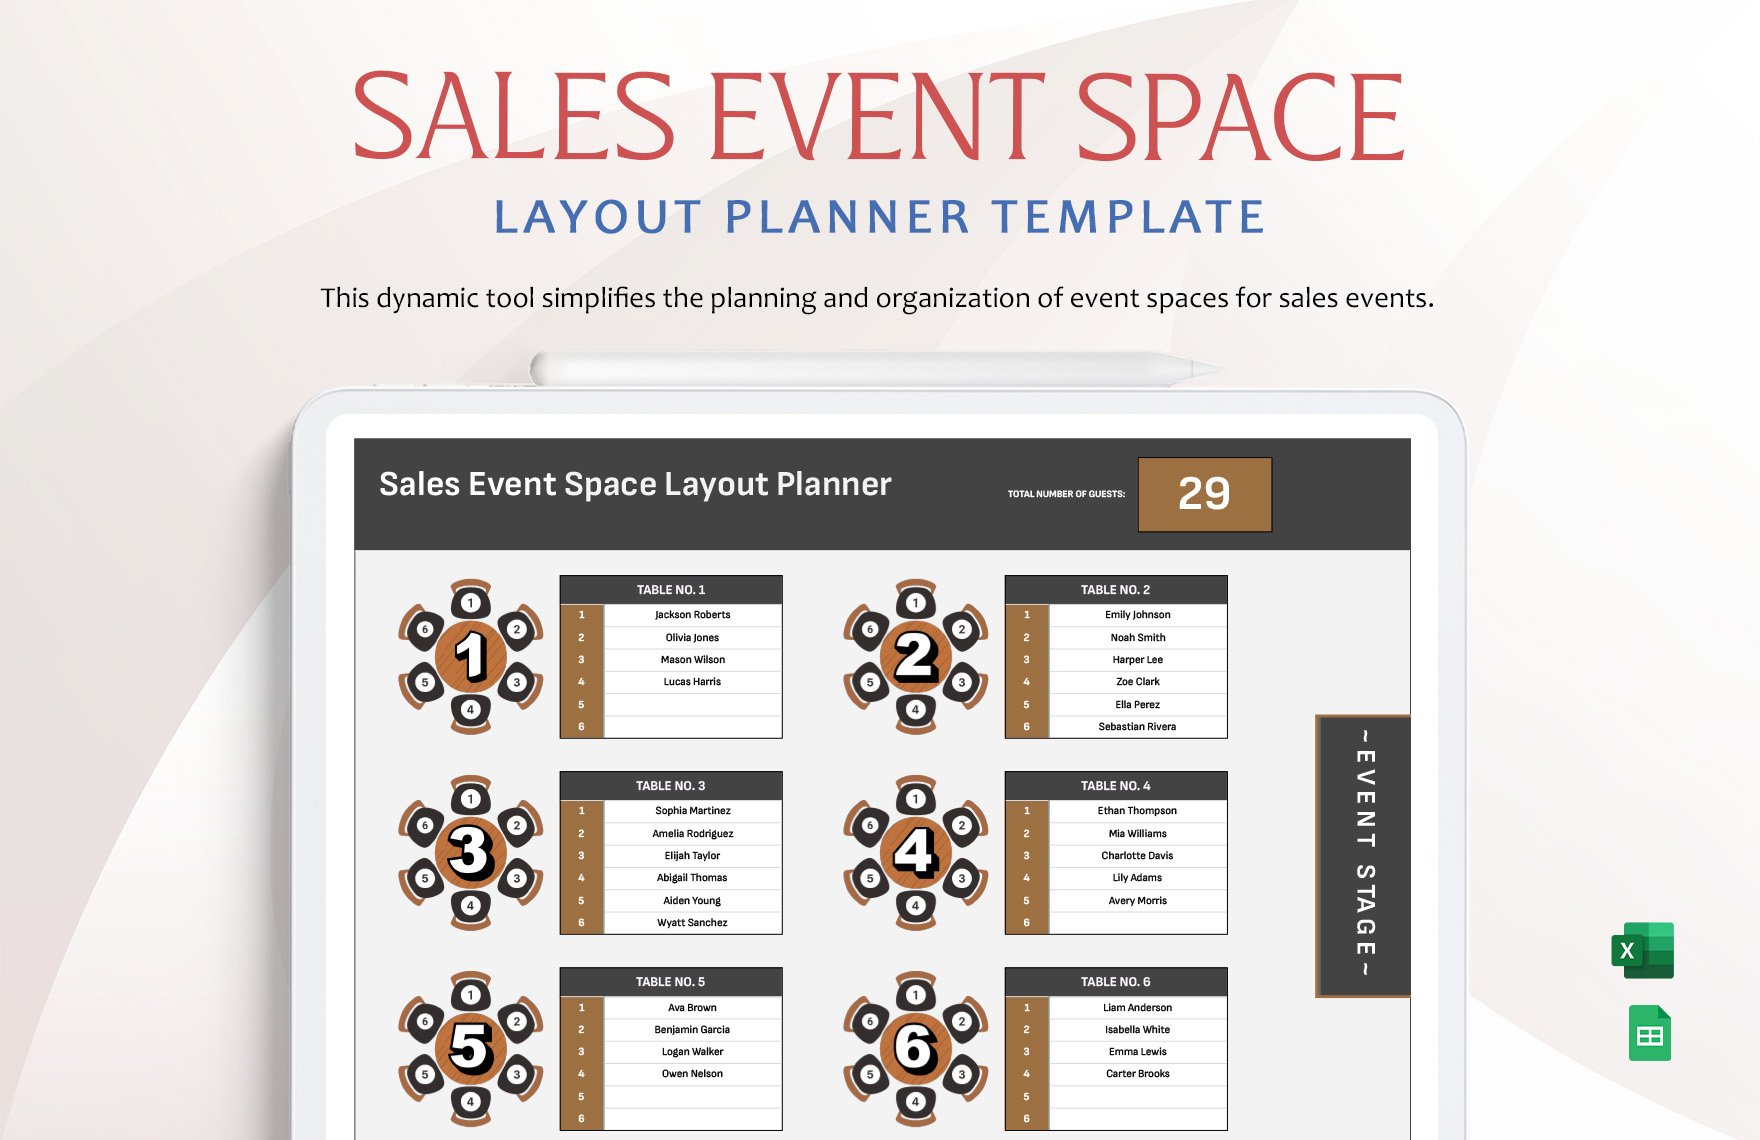 Sales Event Space Layout Planner Template